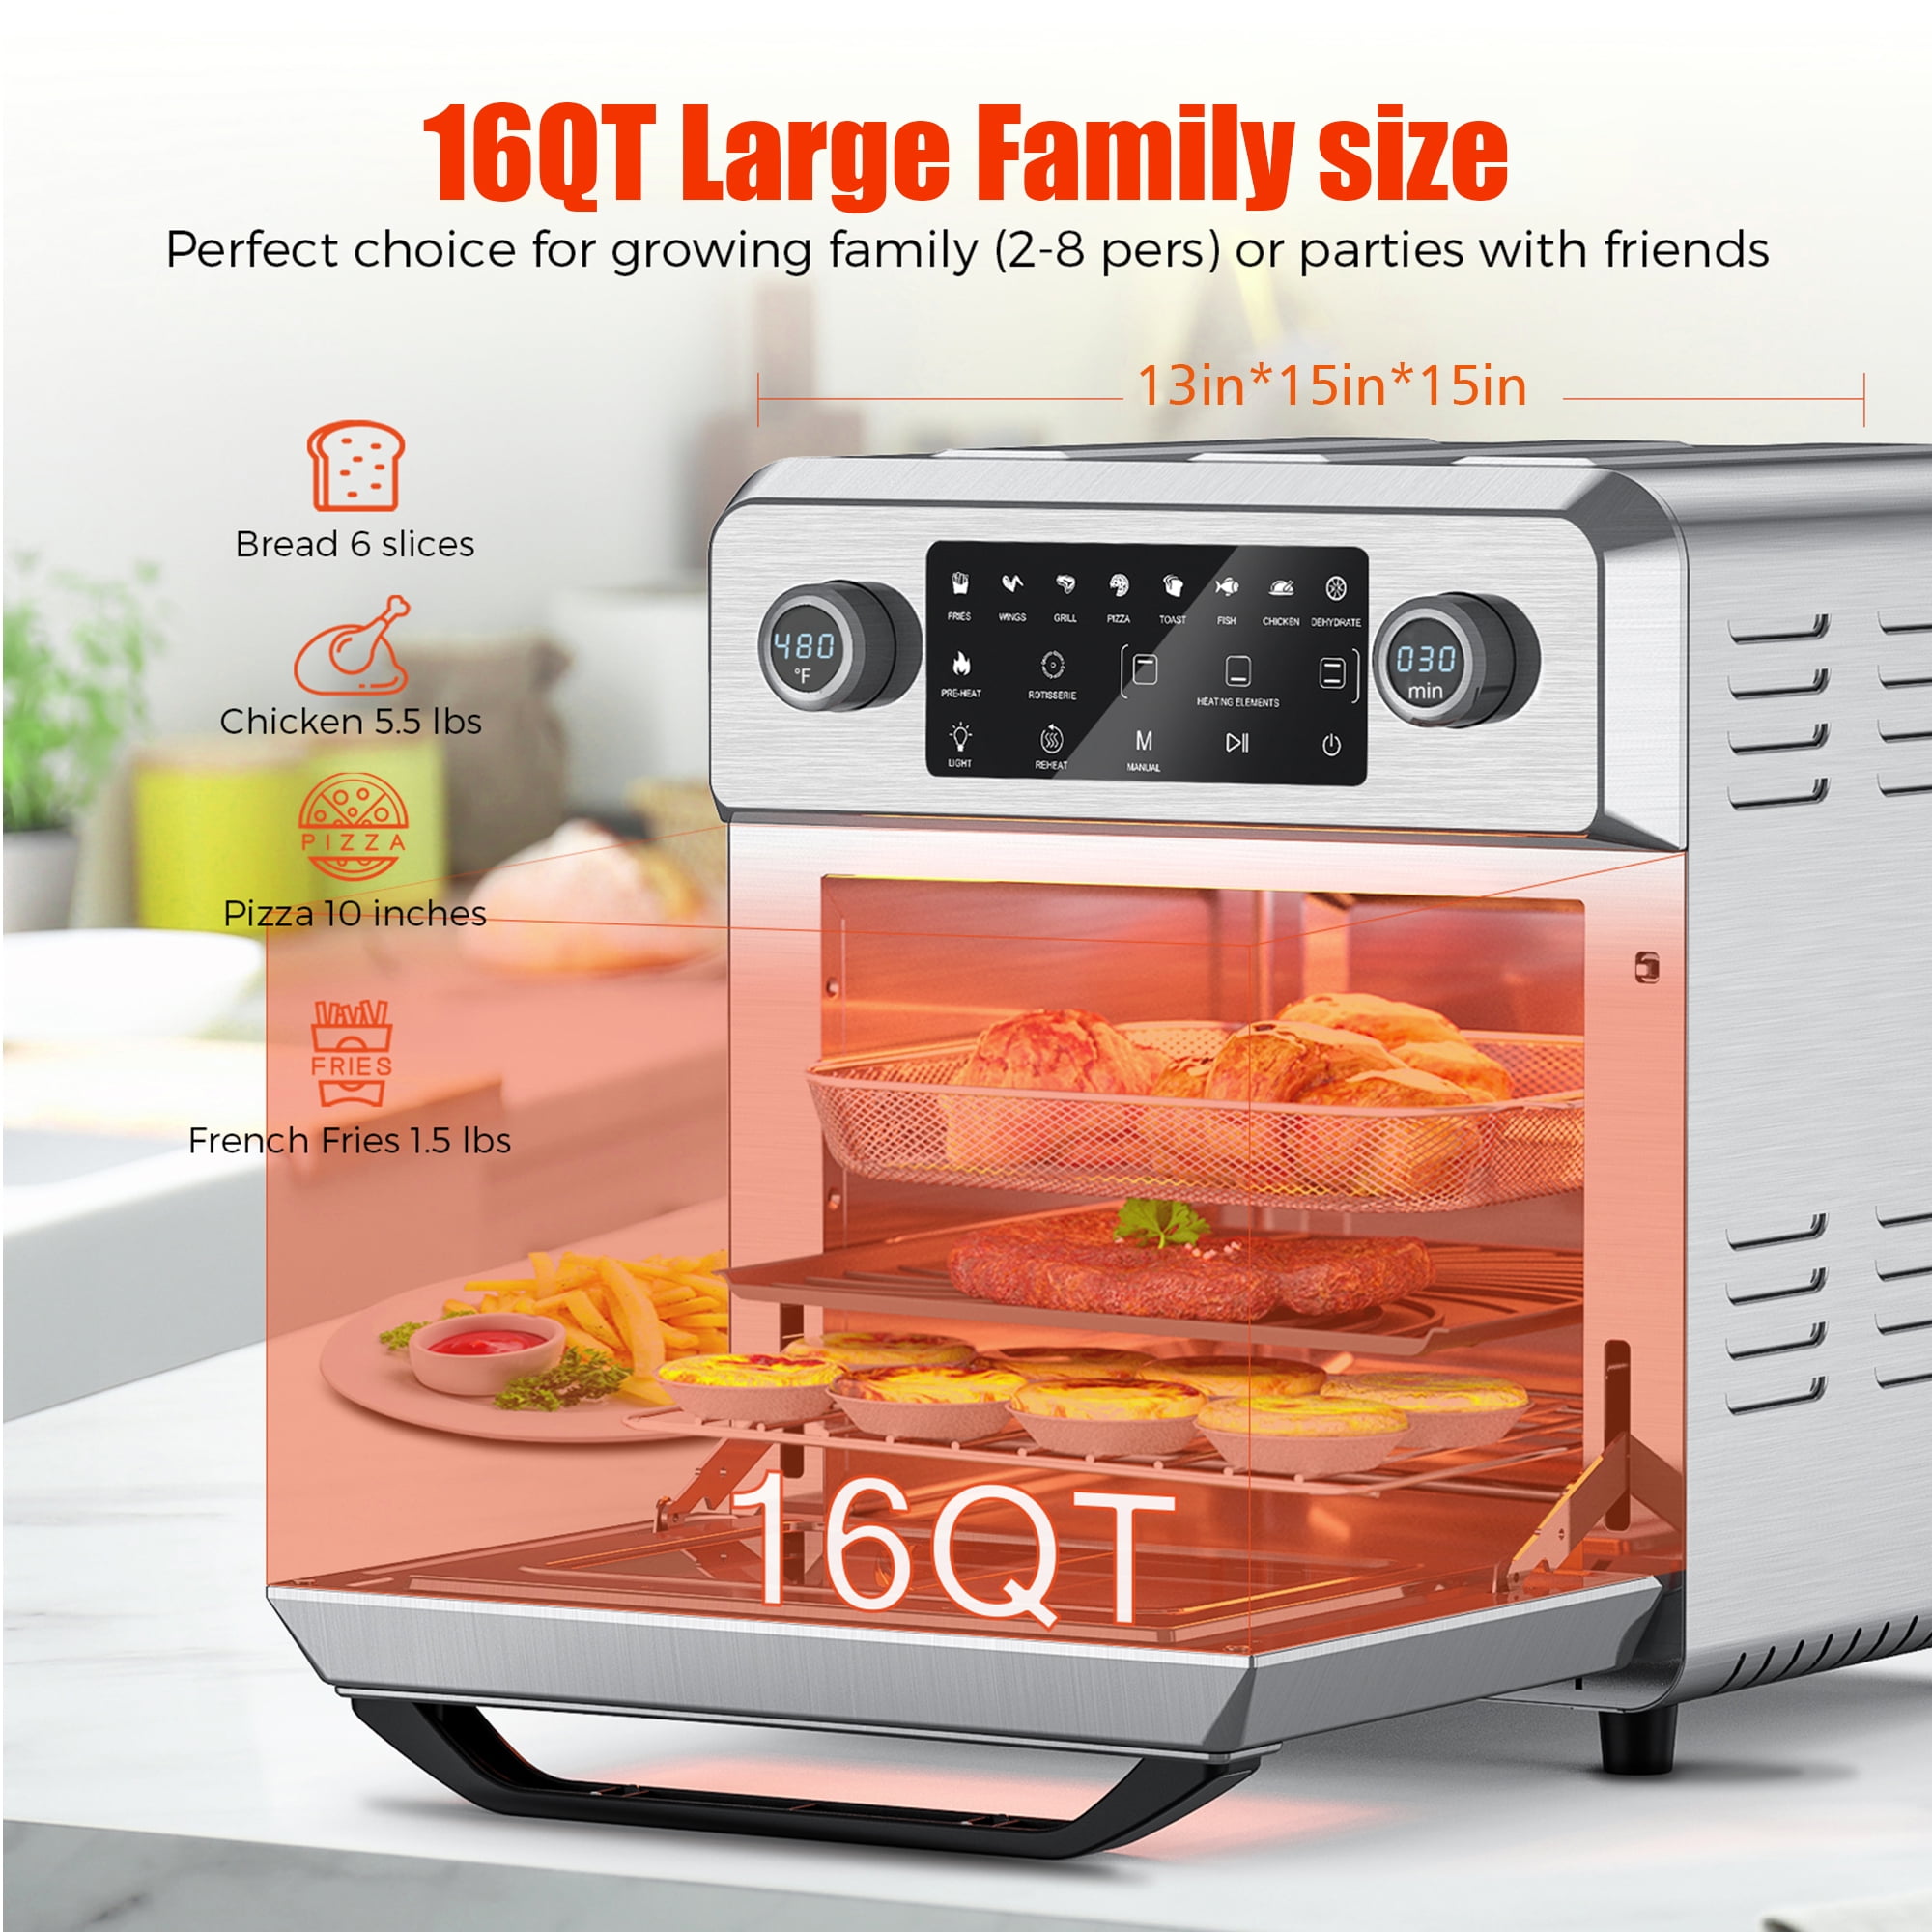 KBS 10-in-1 Toaster Oven with Rotisserie, 1700W Air Fryer Combo for  Dehydrate Bake Broil Roast Toast, for $160 - FM9010